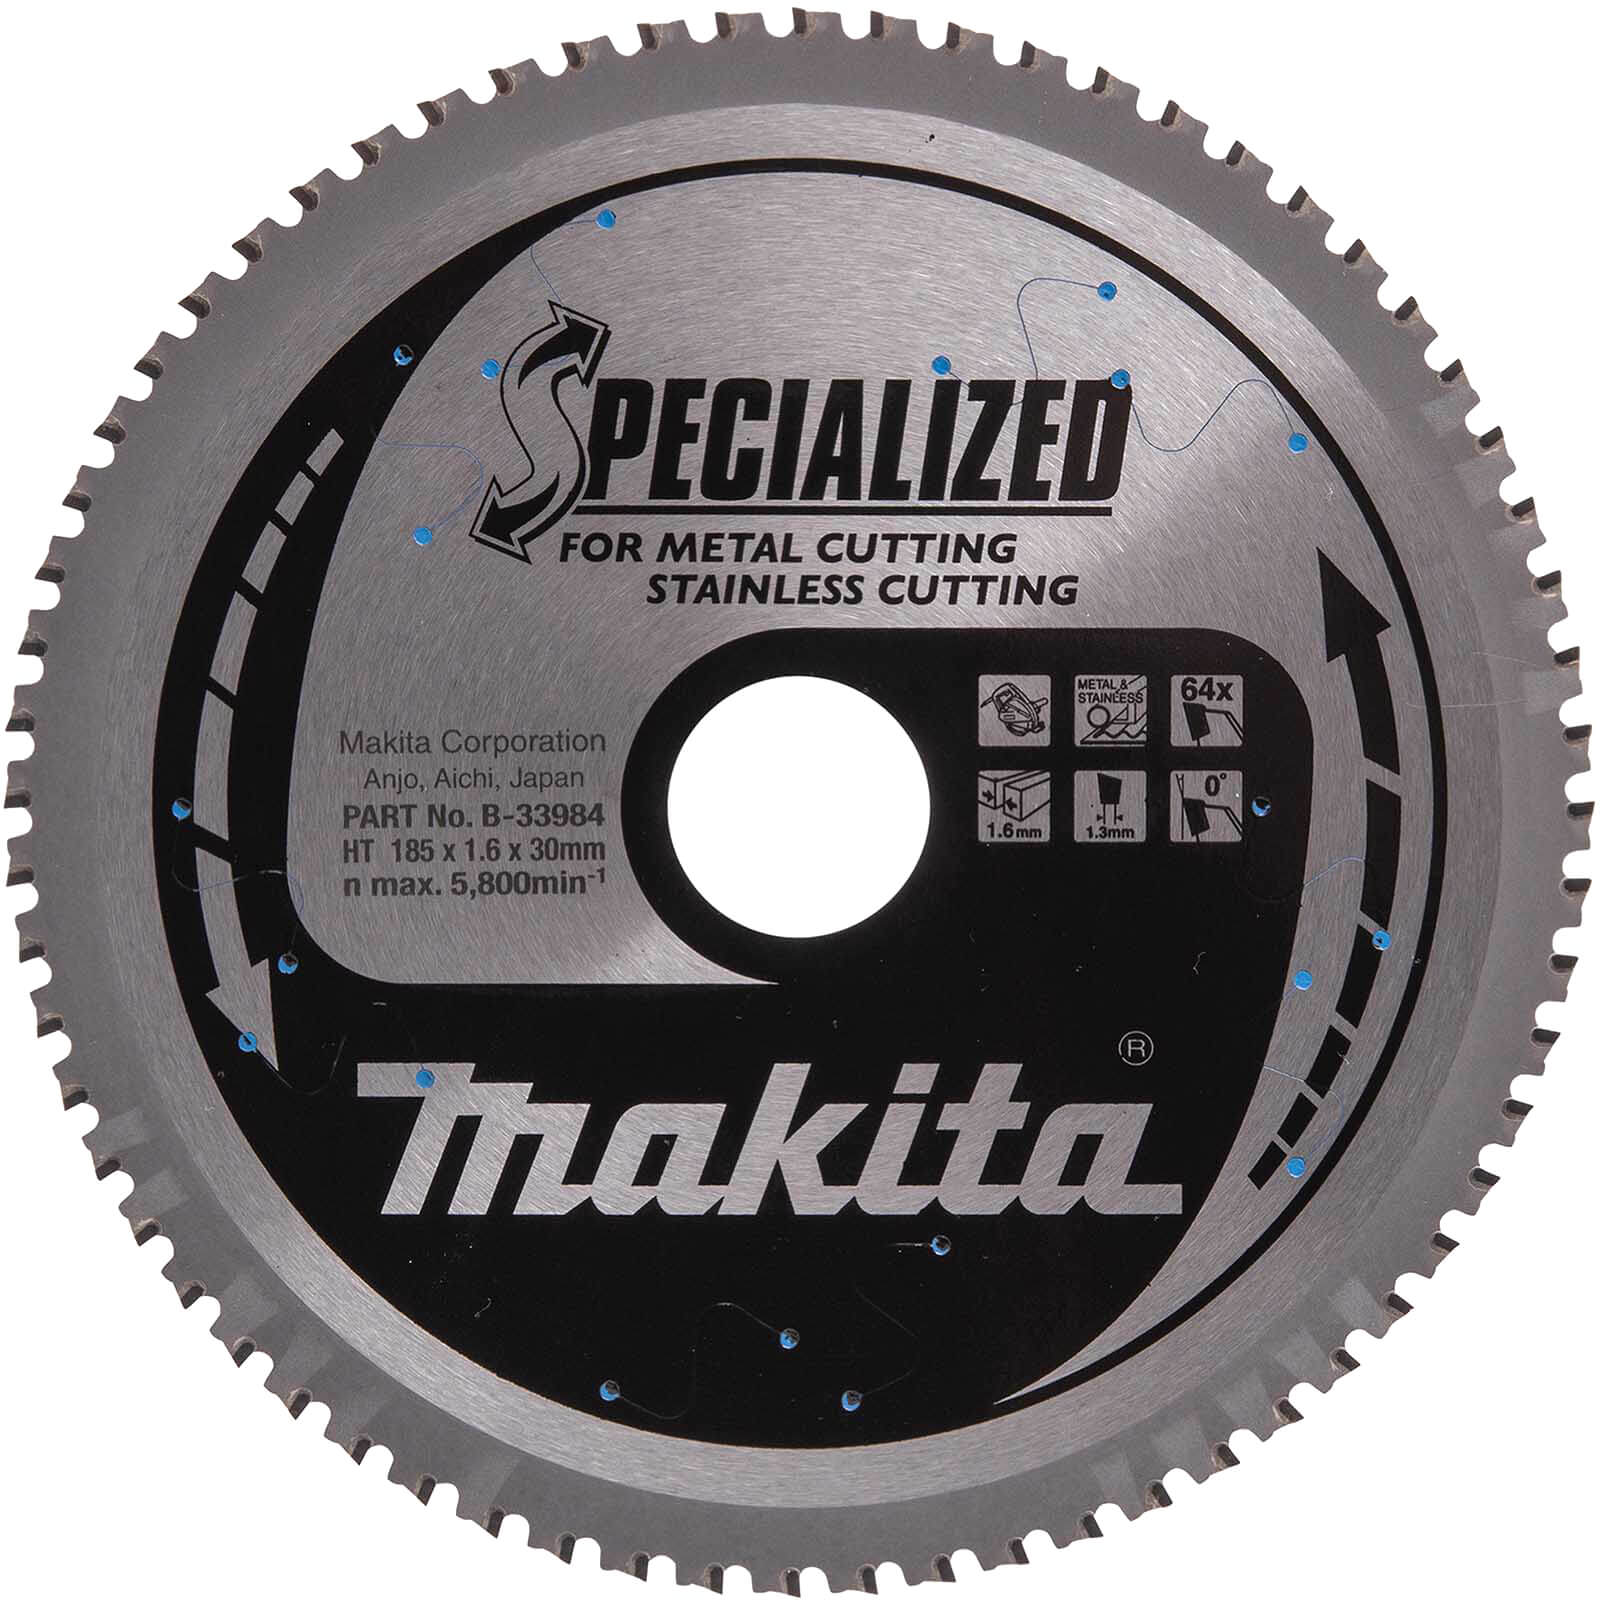 Photos - Power Tool Accessory Makita SPECIALIZED Circular Saw Blade for Stainless Steel Cutting 185mm 64 